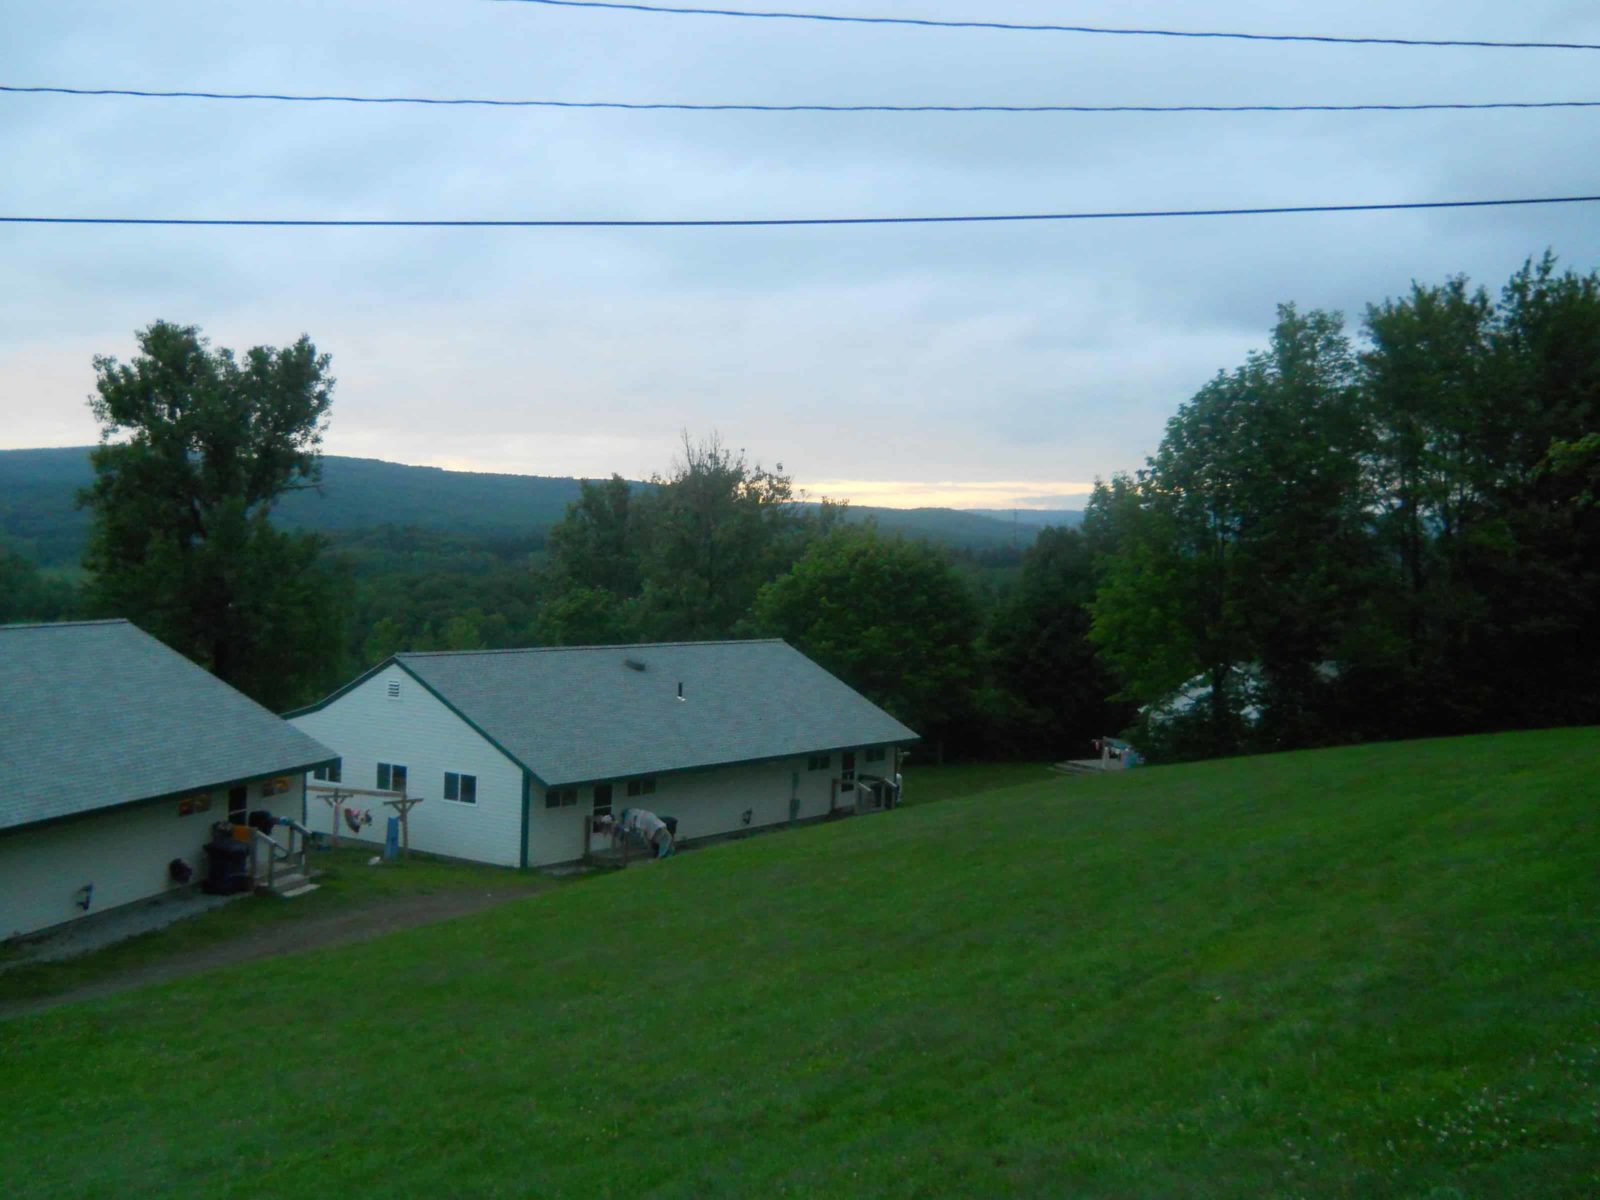 The sun sets over the hill behind Girls' Row in 2013.